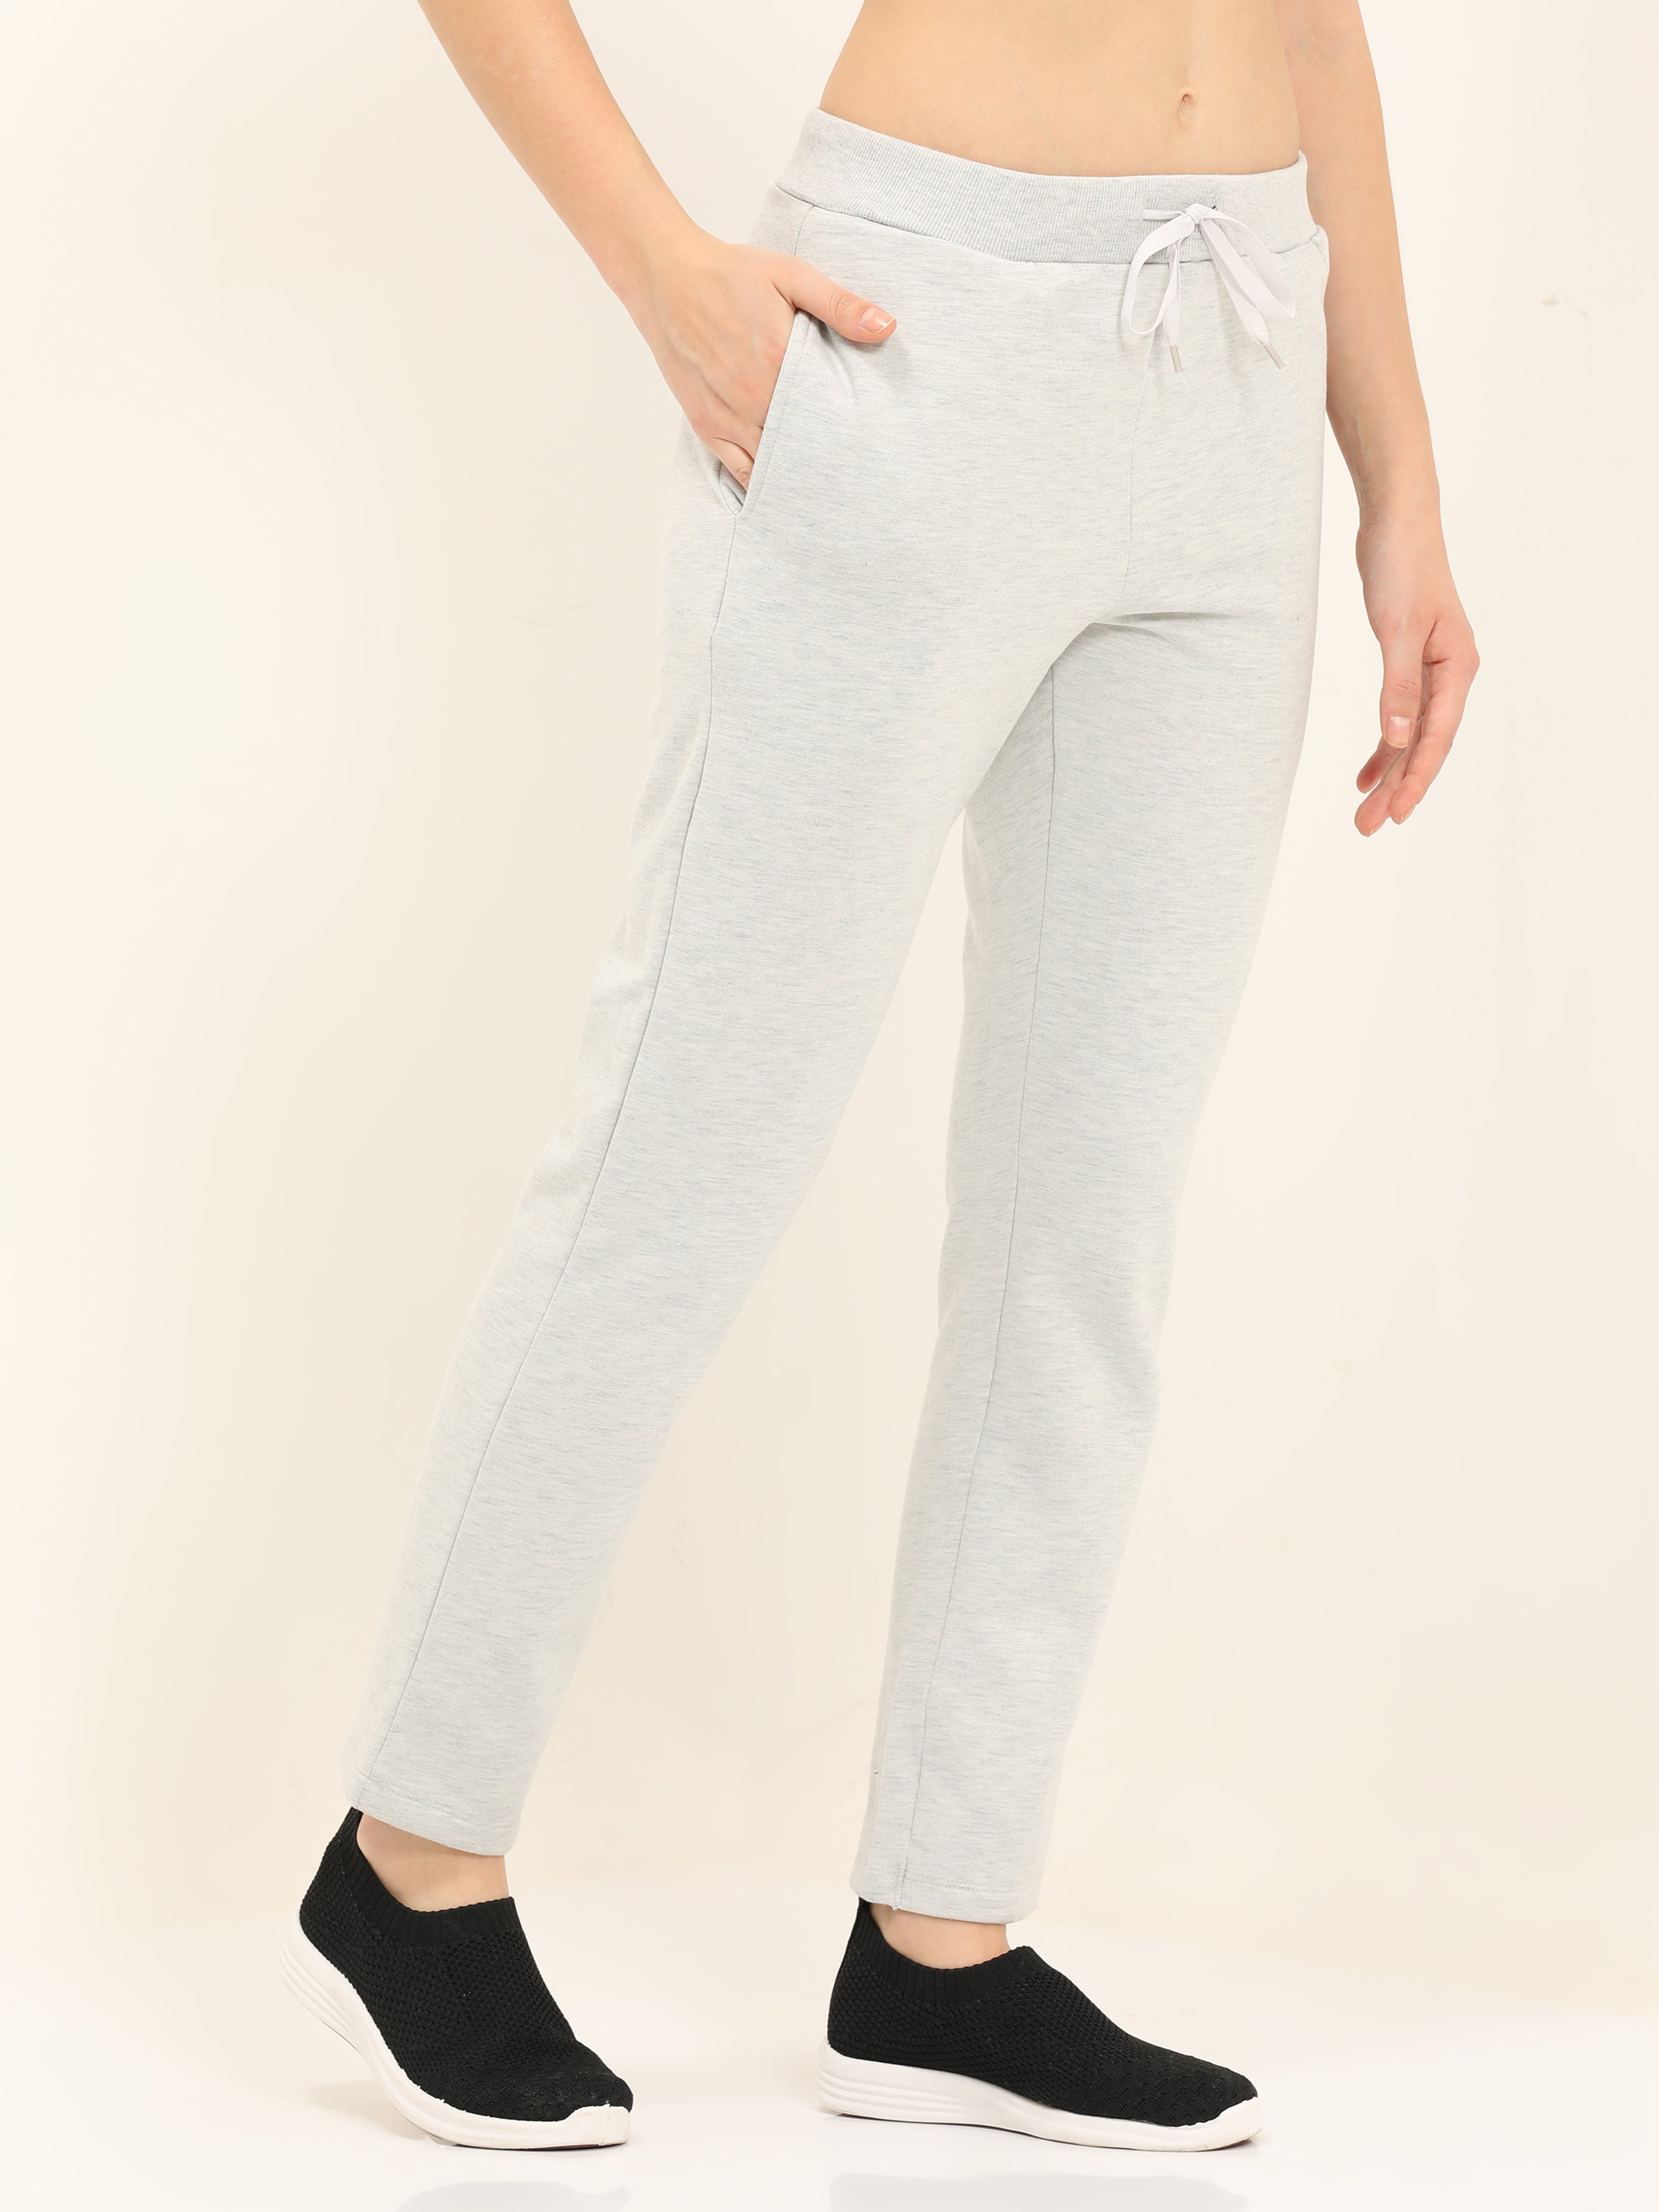 The Baxter In Night Talk Pant